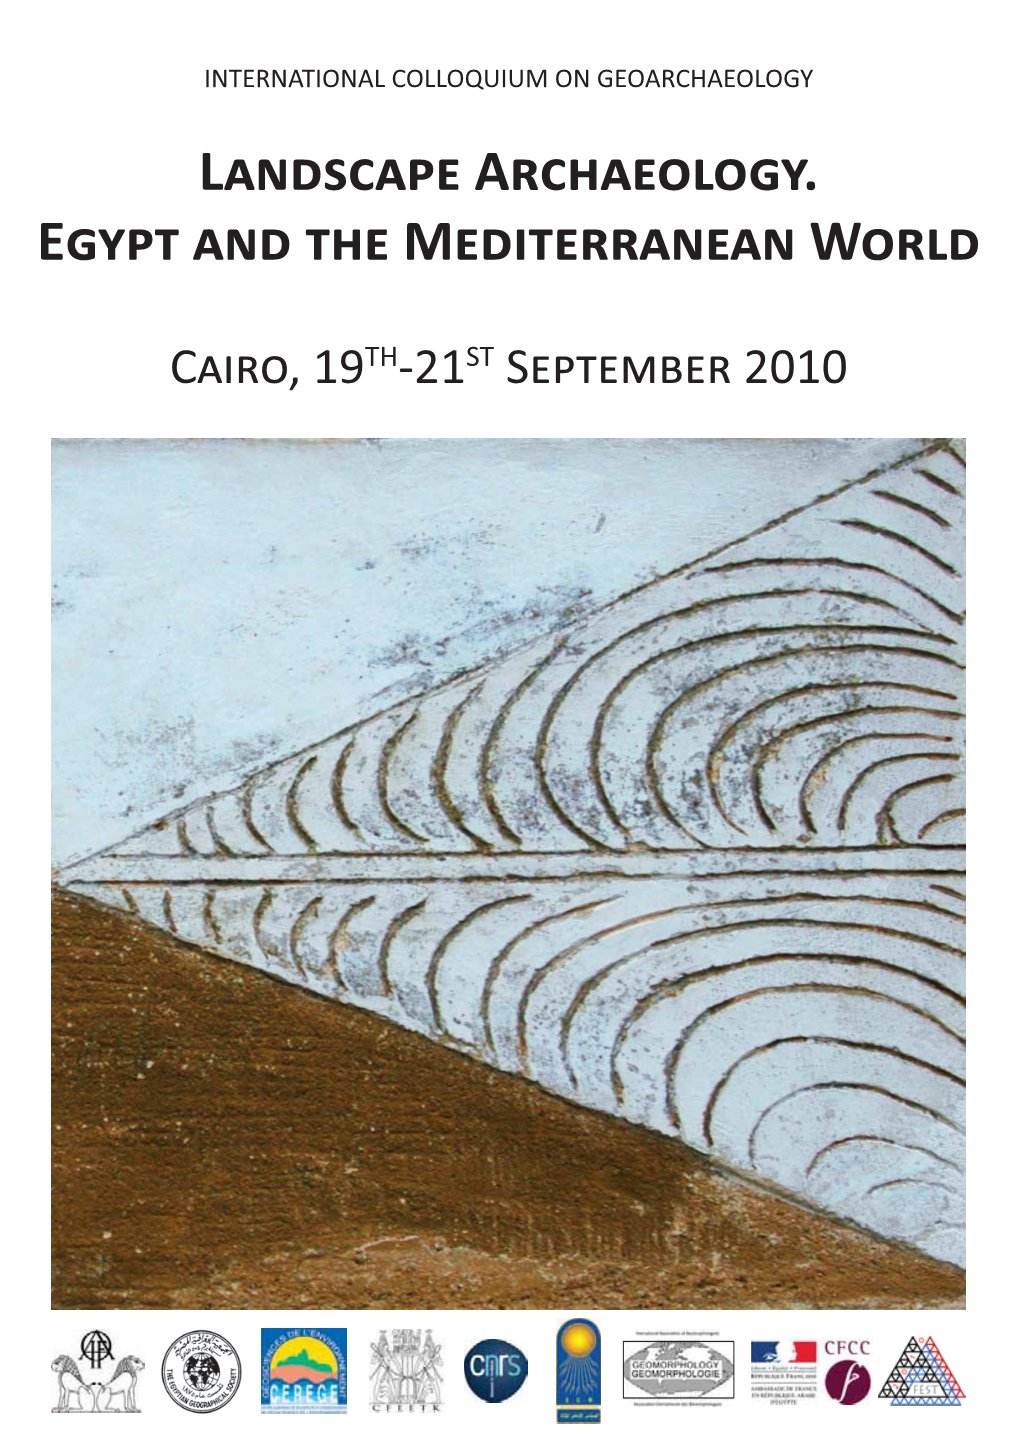 Landscape Rchaeo½ogy. Gypt and the Mediterranean